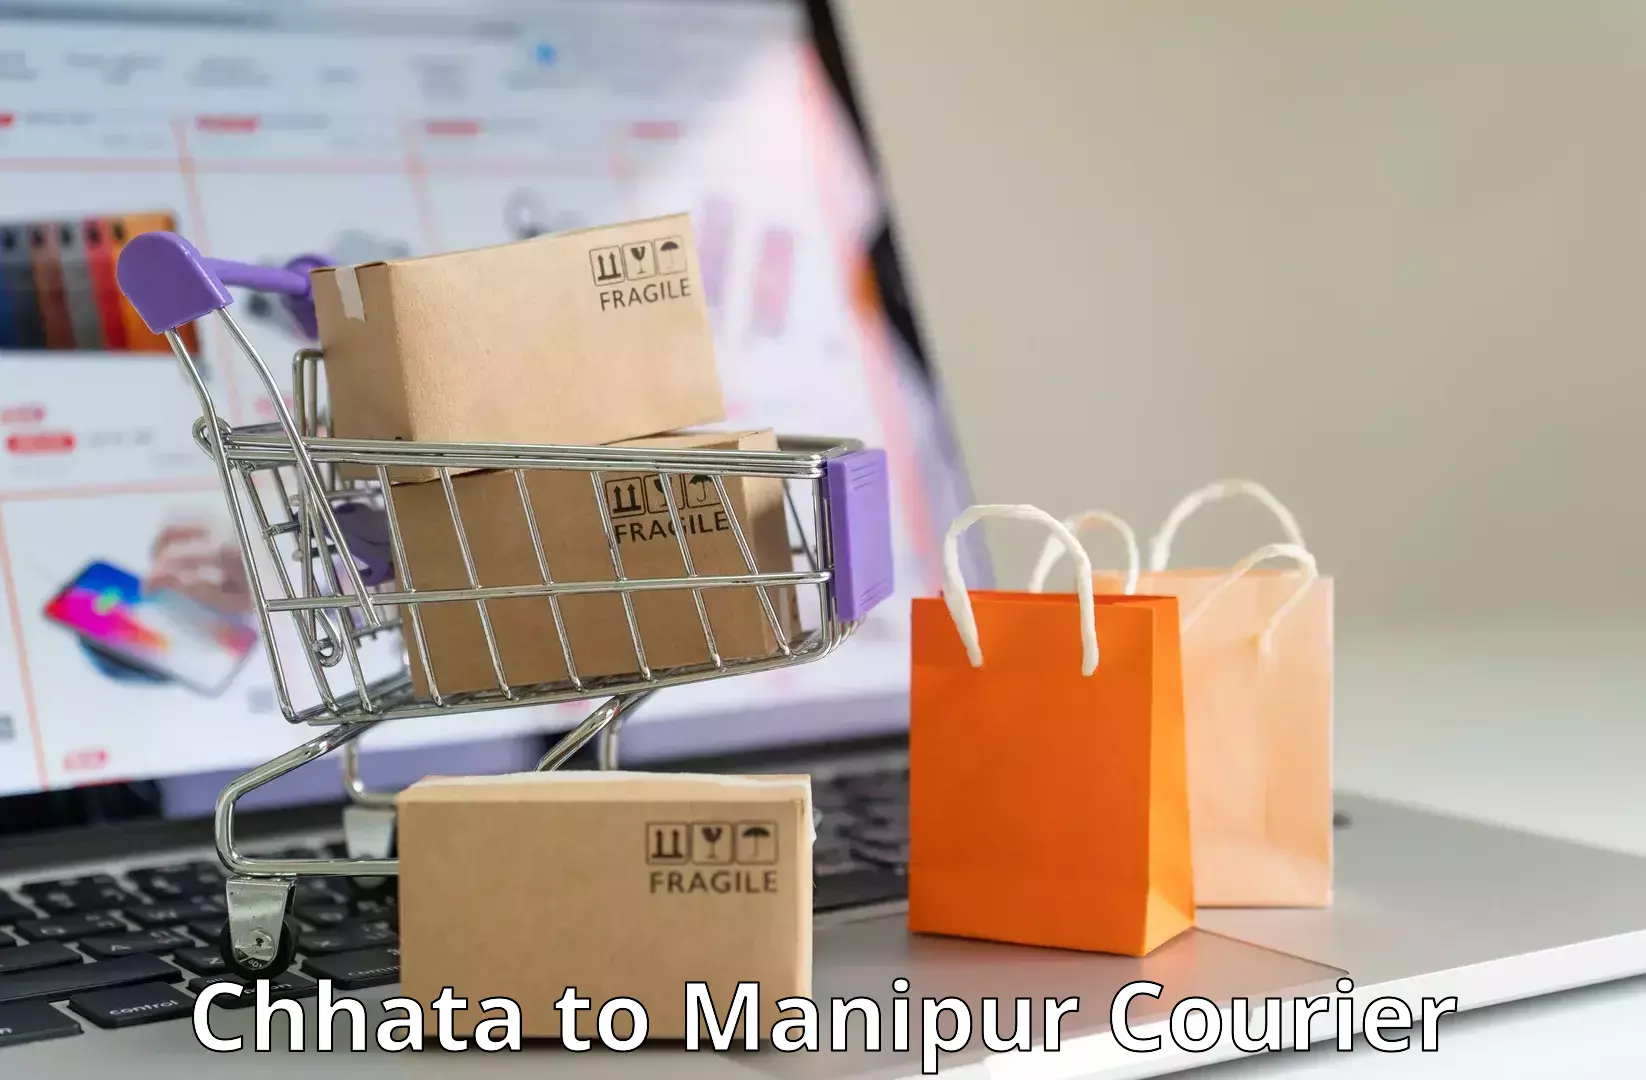 Customizable delivery plans Chhata to Manipur